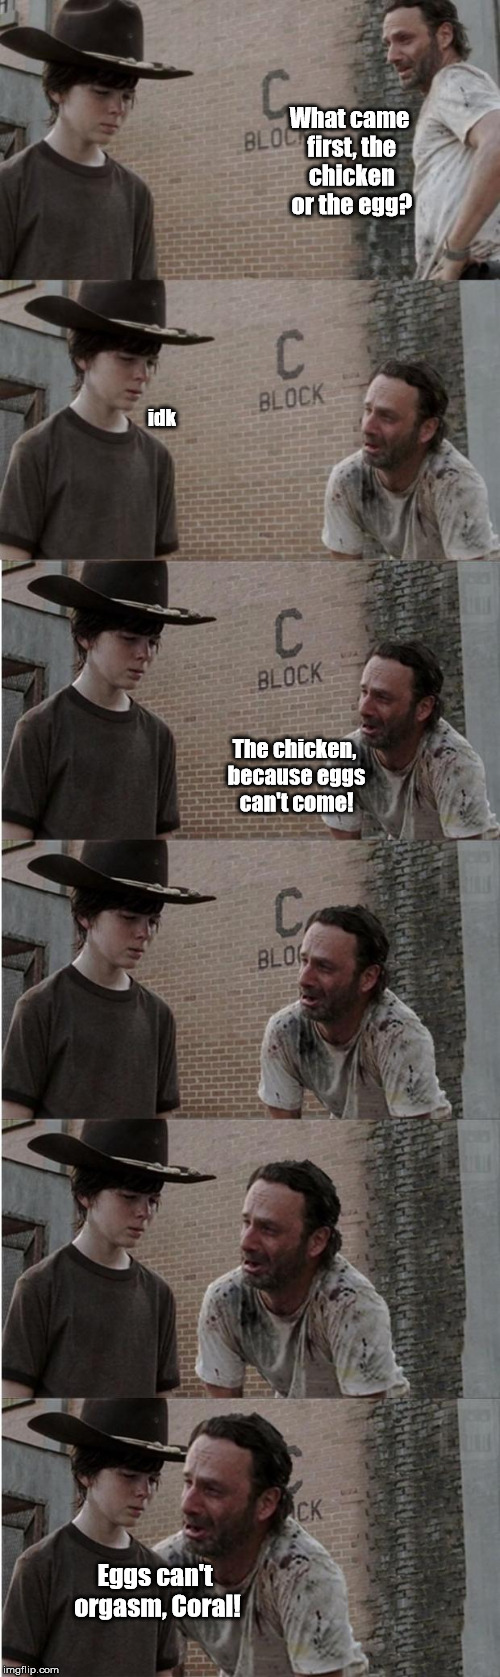 Rick and Carl Longer | What came first, the chicken or the egg? idk The chicken, because eggs can't come! Eggs can't orgasm, Coral! | image tagged in memes,rick and carl longer | made w/ Imgflip meme maker